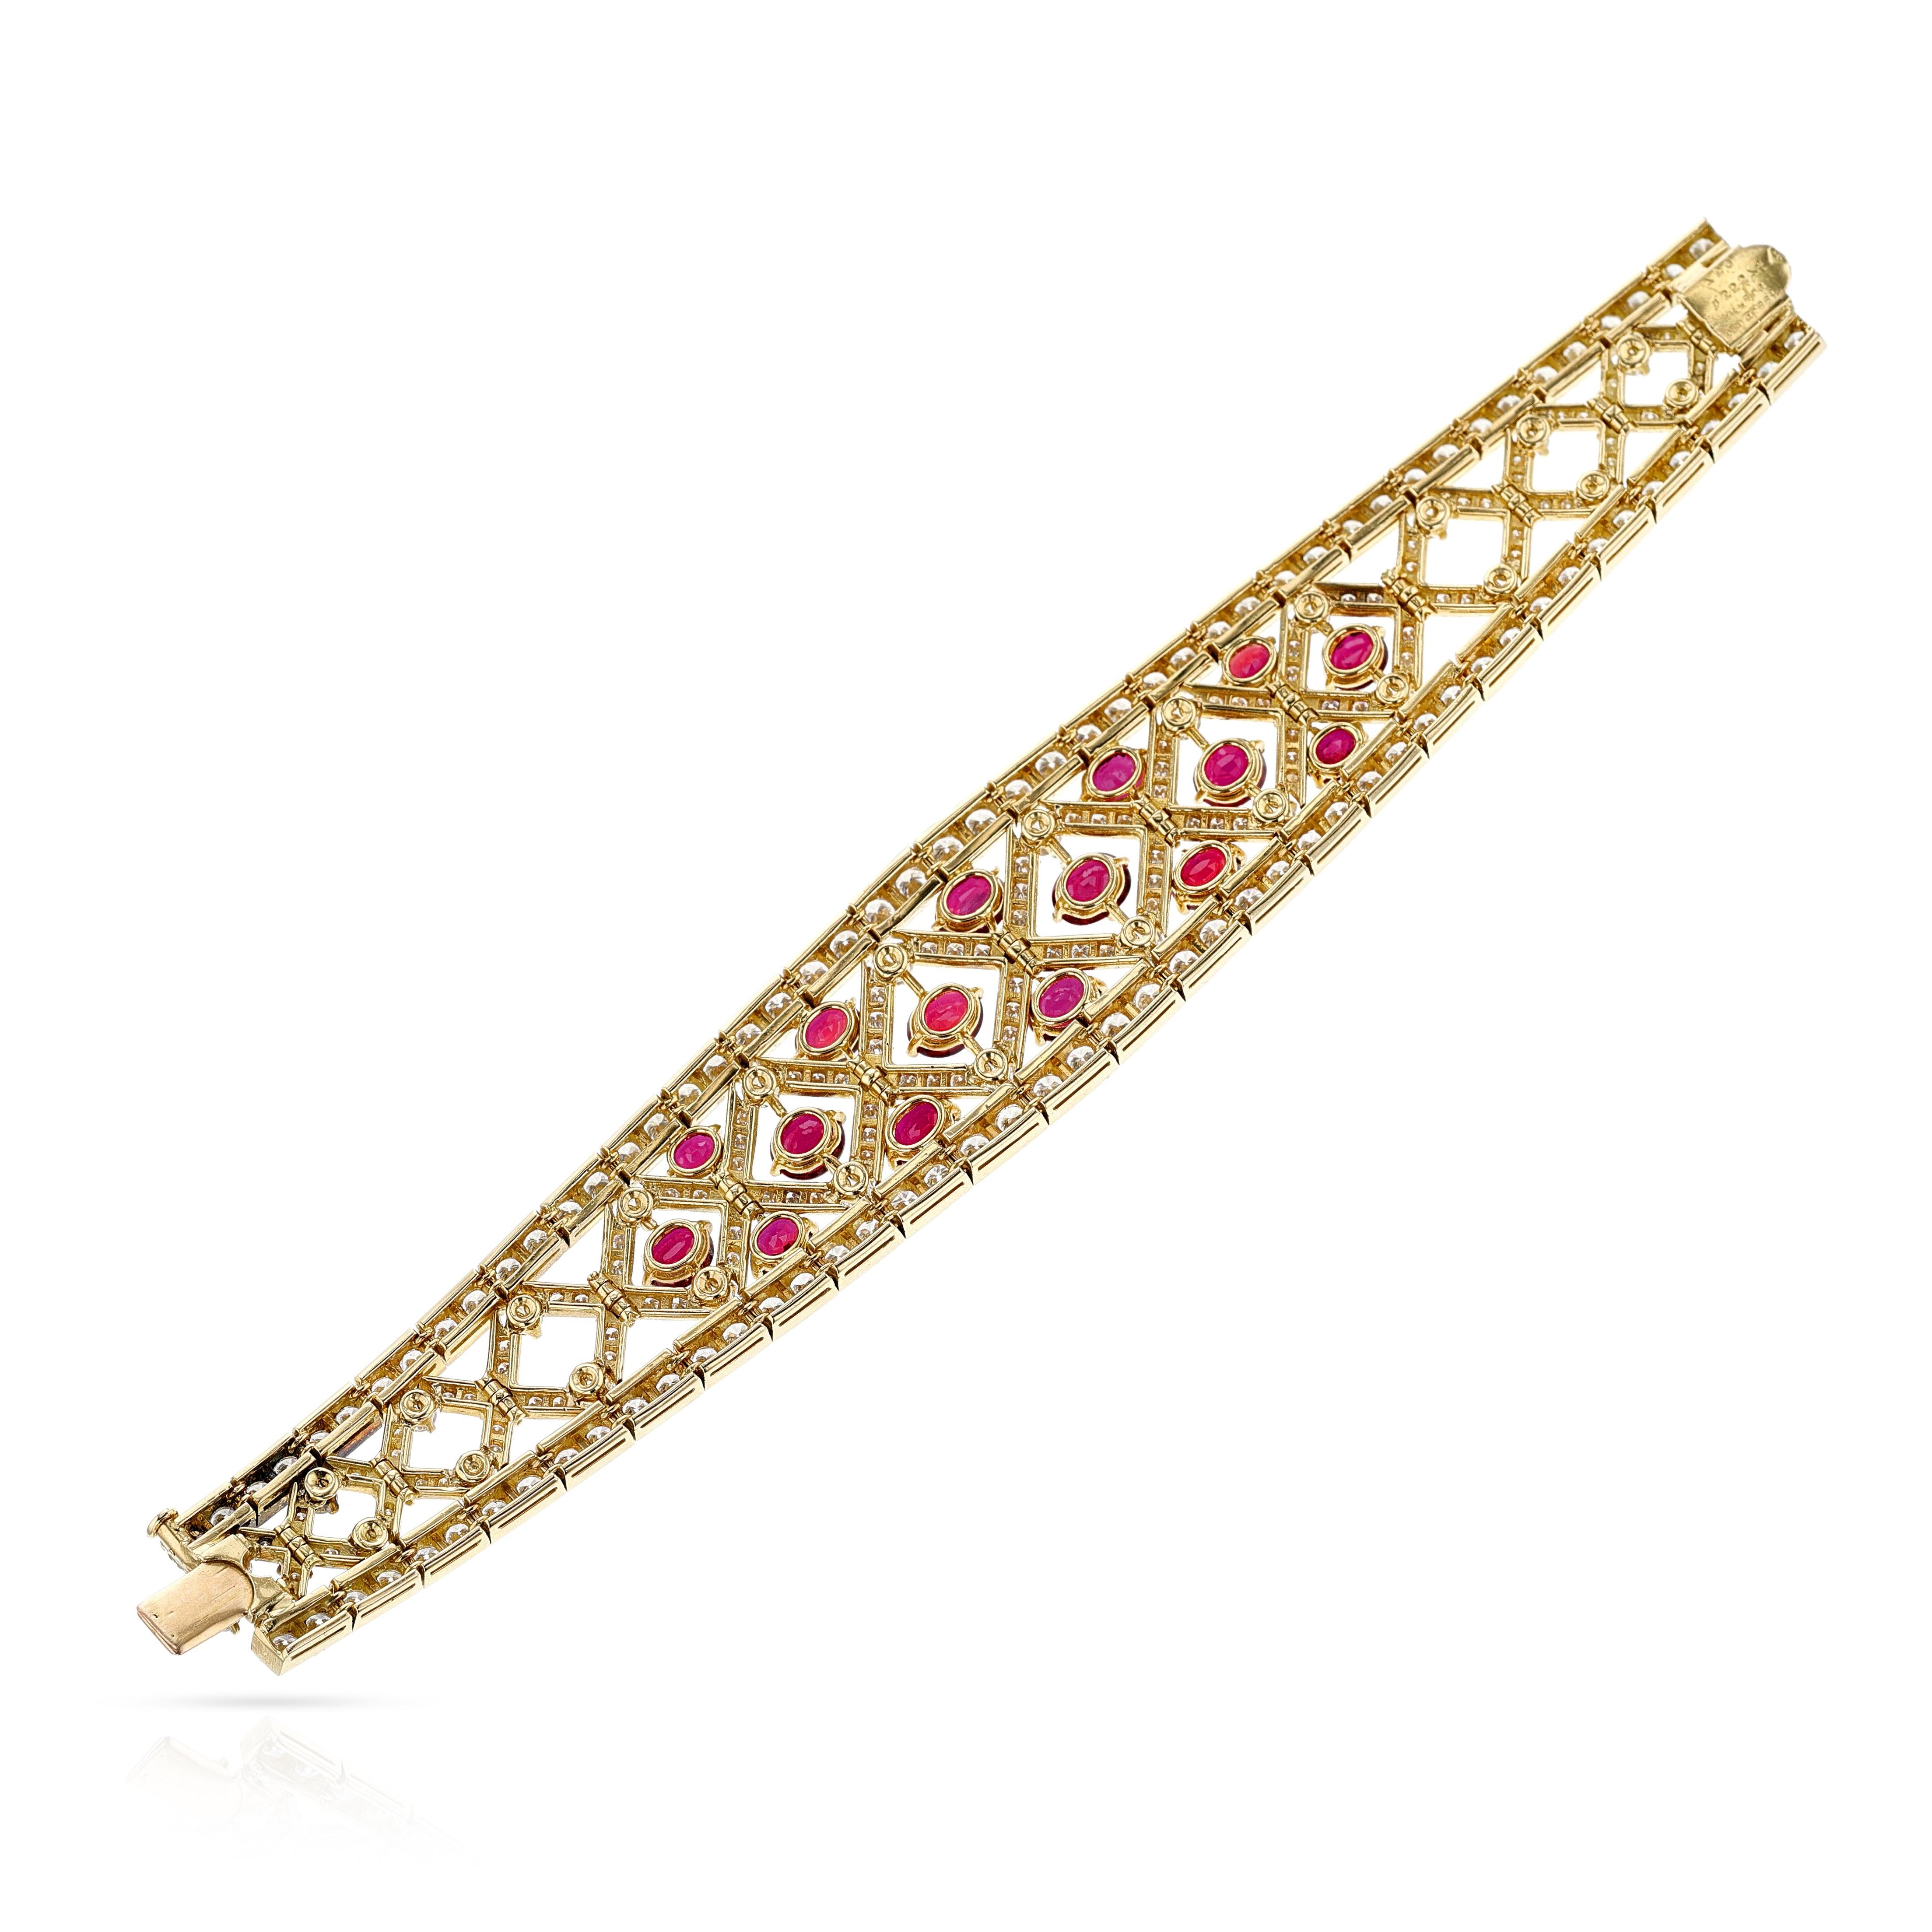 1980s Van Cleef & Arpels Ruby and Diamond Bracelet, 18k Yellow In Excellent Condition For Sale In New York, NY